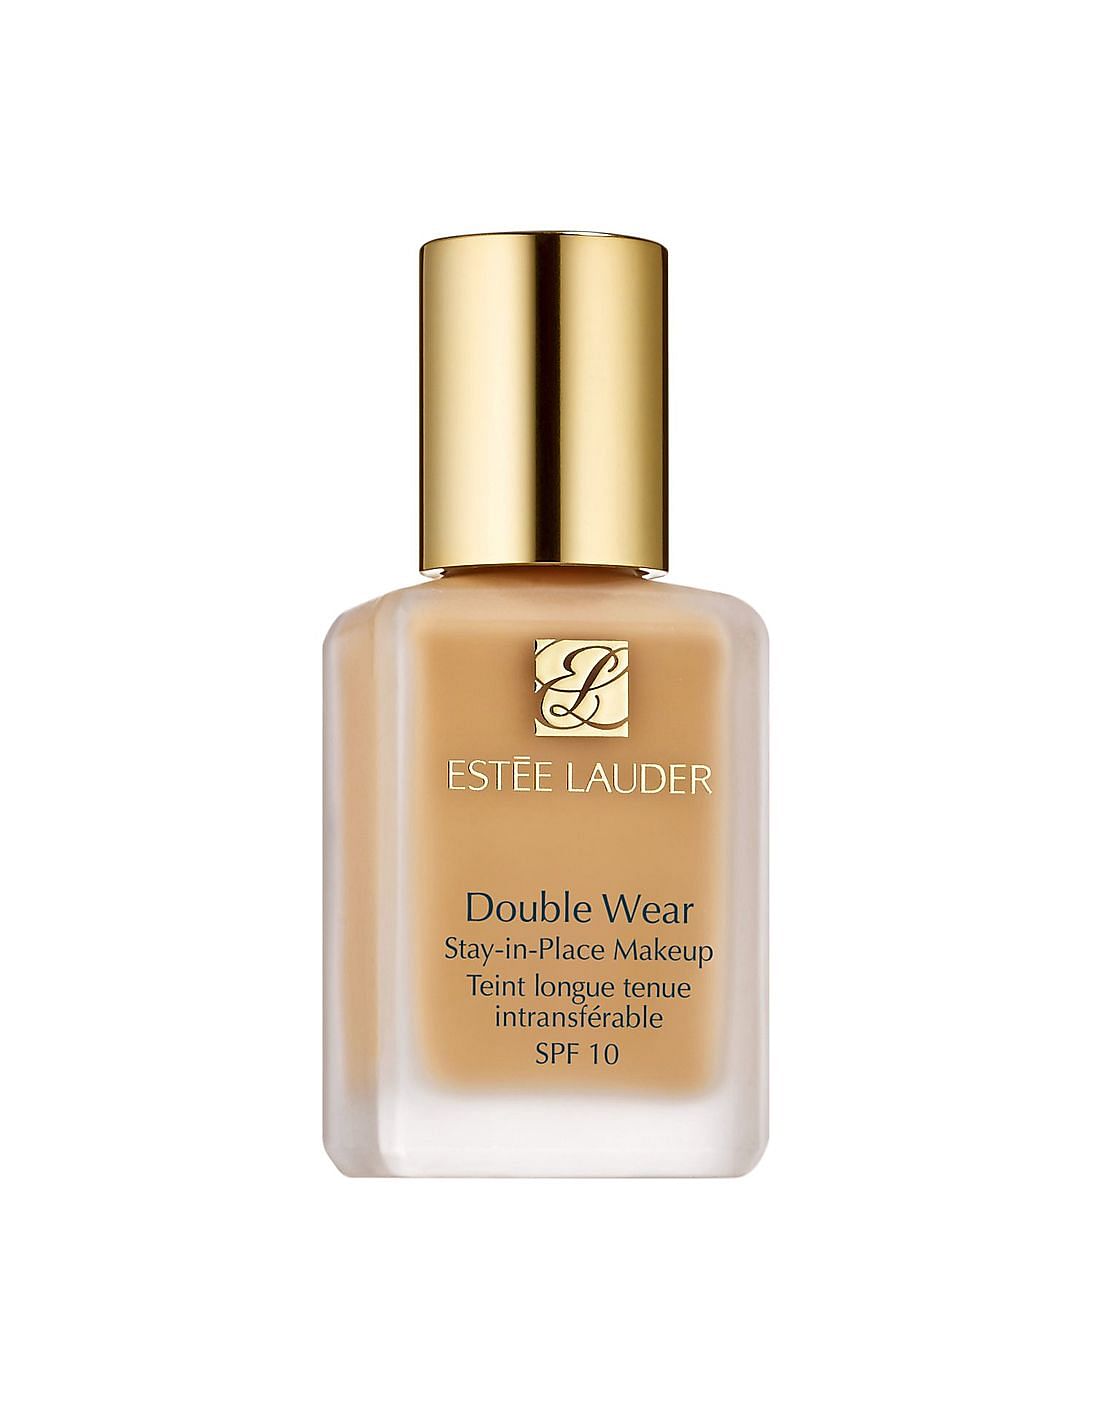 Double Wear STAY-IN-PLACE MAKEUP SPF 10/PA++ | Estee Lauder Hong Kong E-commerce Site